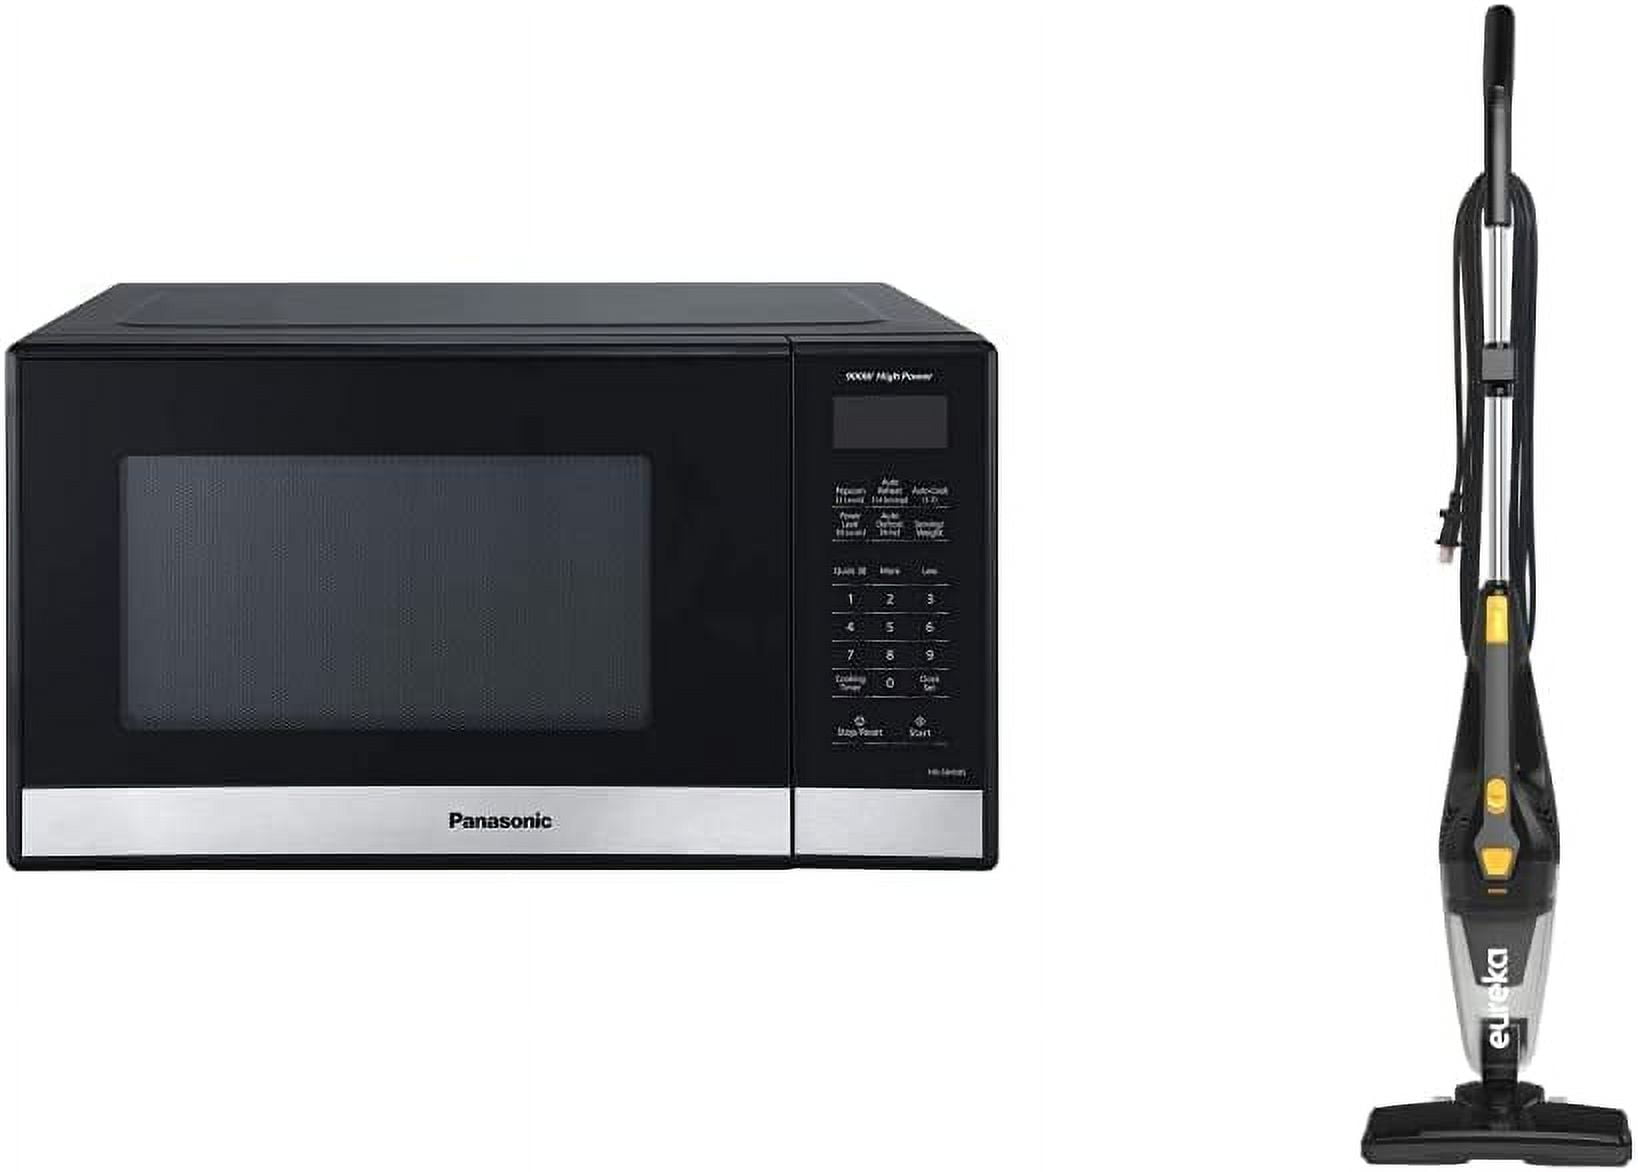 Panasonic NN-SB458S Compact Microwave, 0.9 cft, Stainless Steel & Nordic  Ware Deluxe Plate Cover 